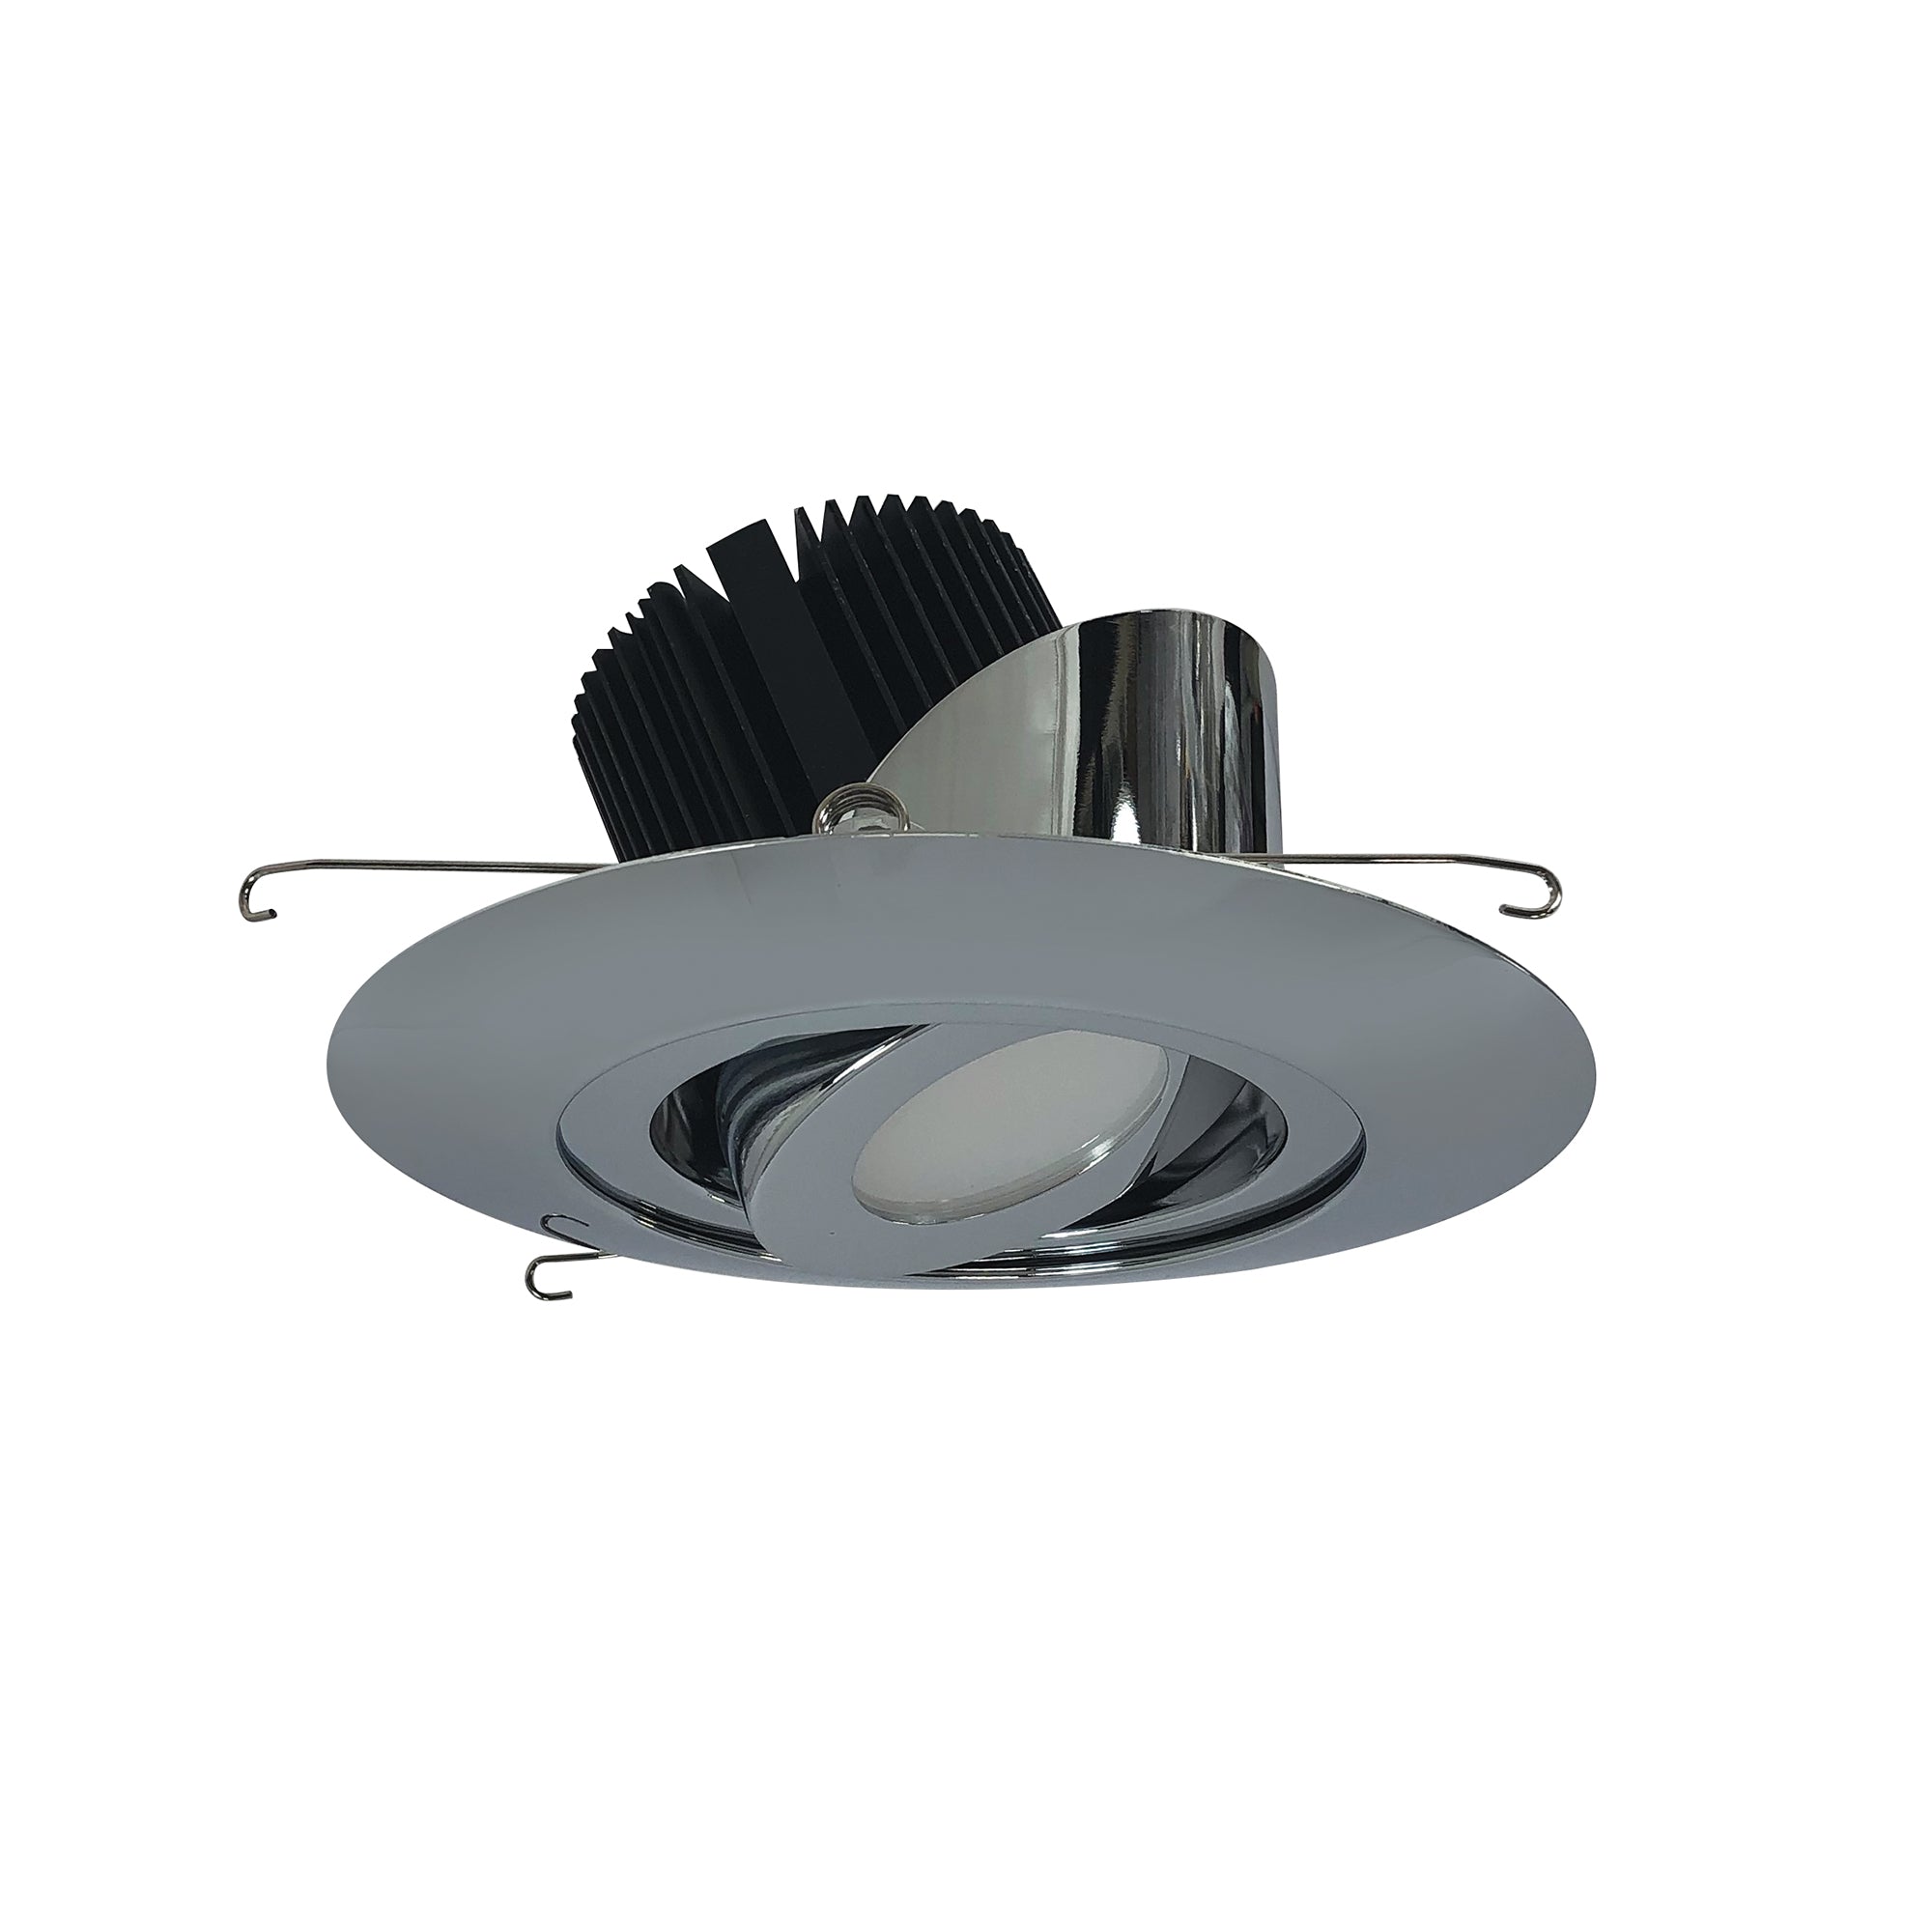 Nora Lighting NRM2-614L2540MC - Recessed - 6 Inch Marquise II Round Surface Adjustable Trim, Medium Flood, 2500lm, 4000K, Chrome (Not Compatible with NHRM2-625 Housings)